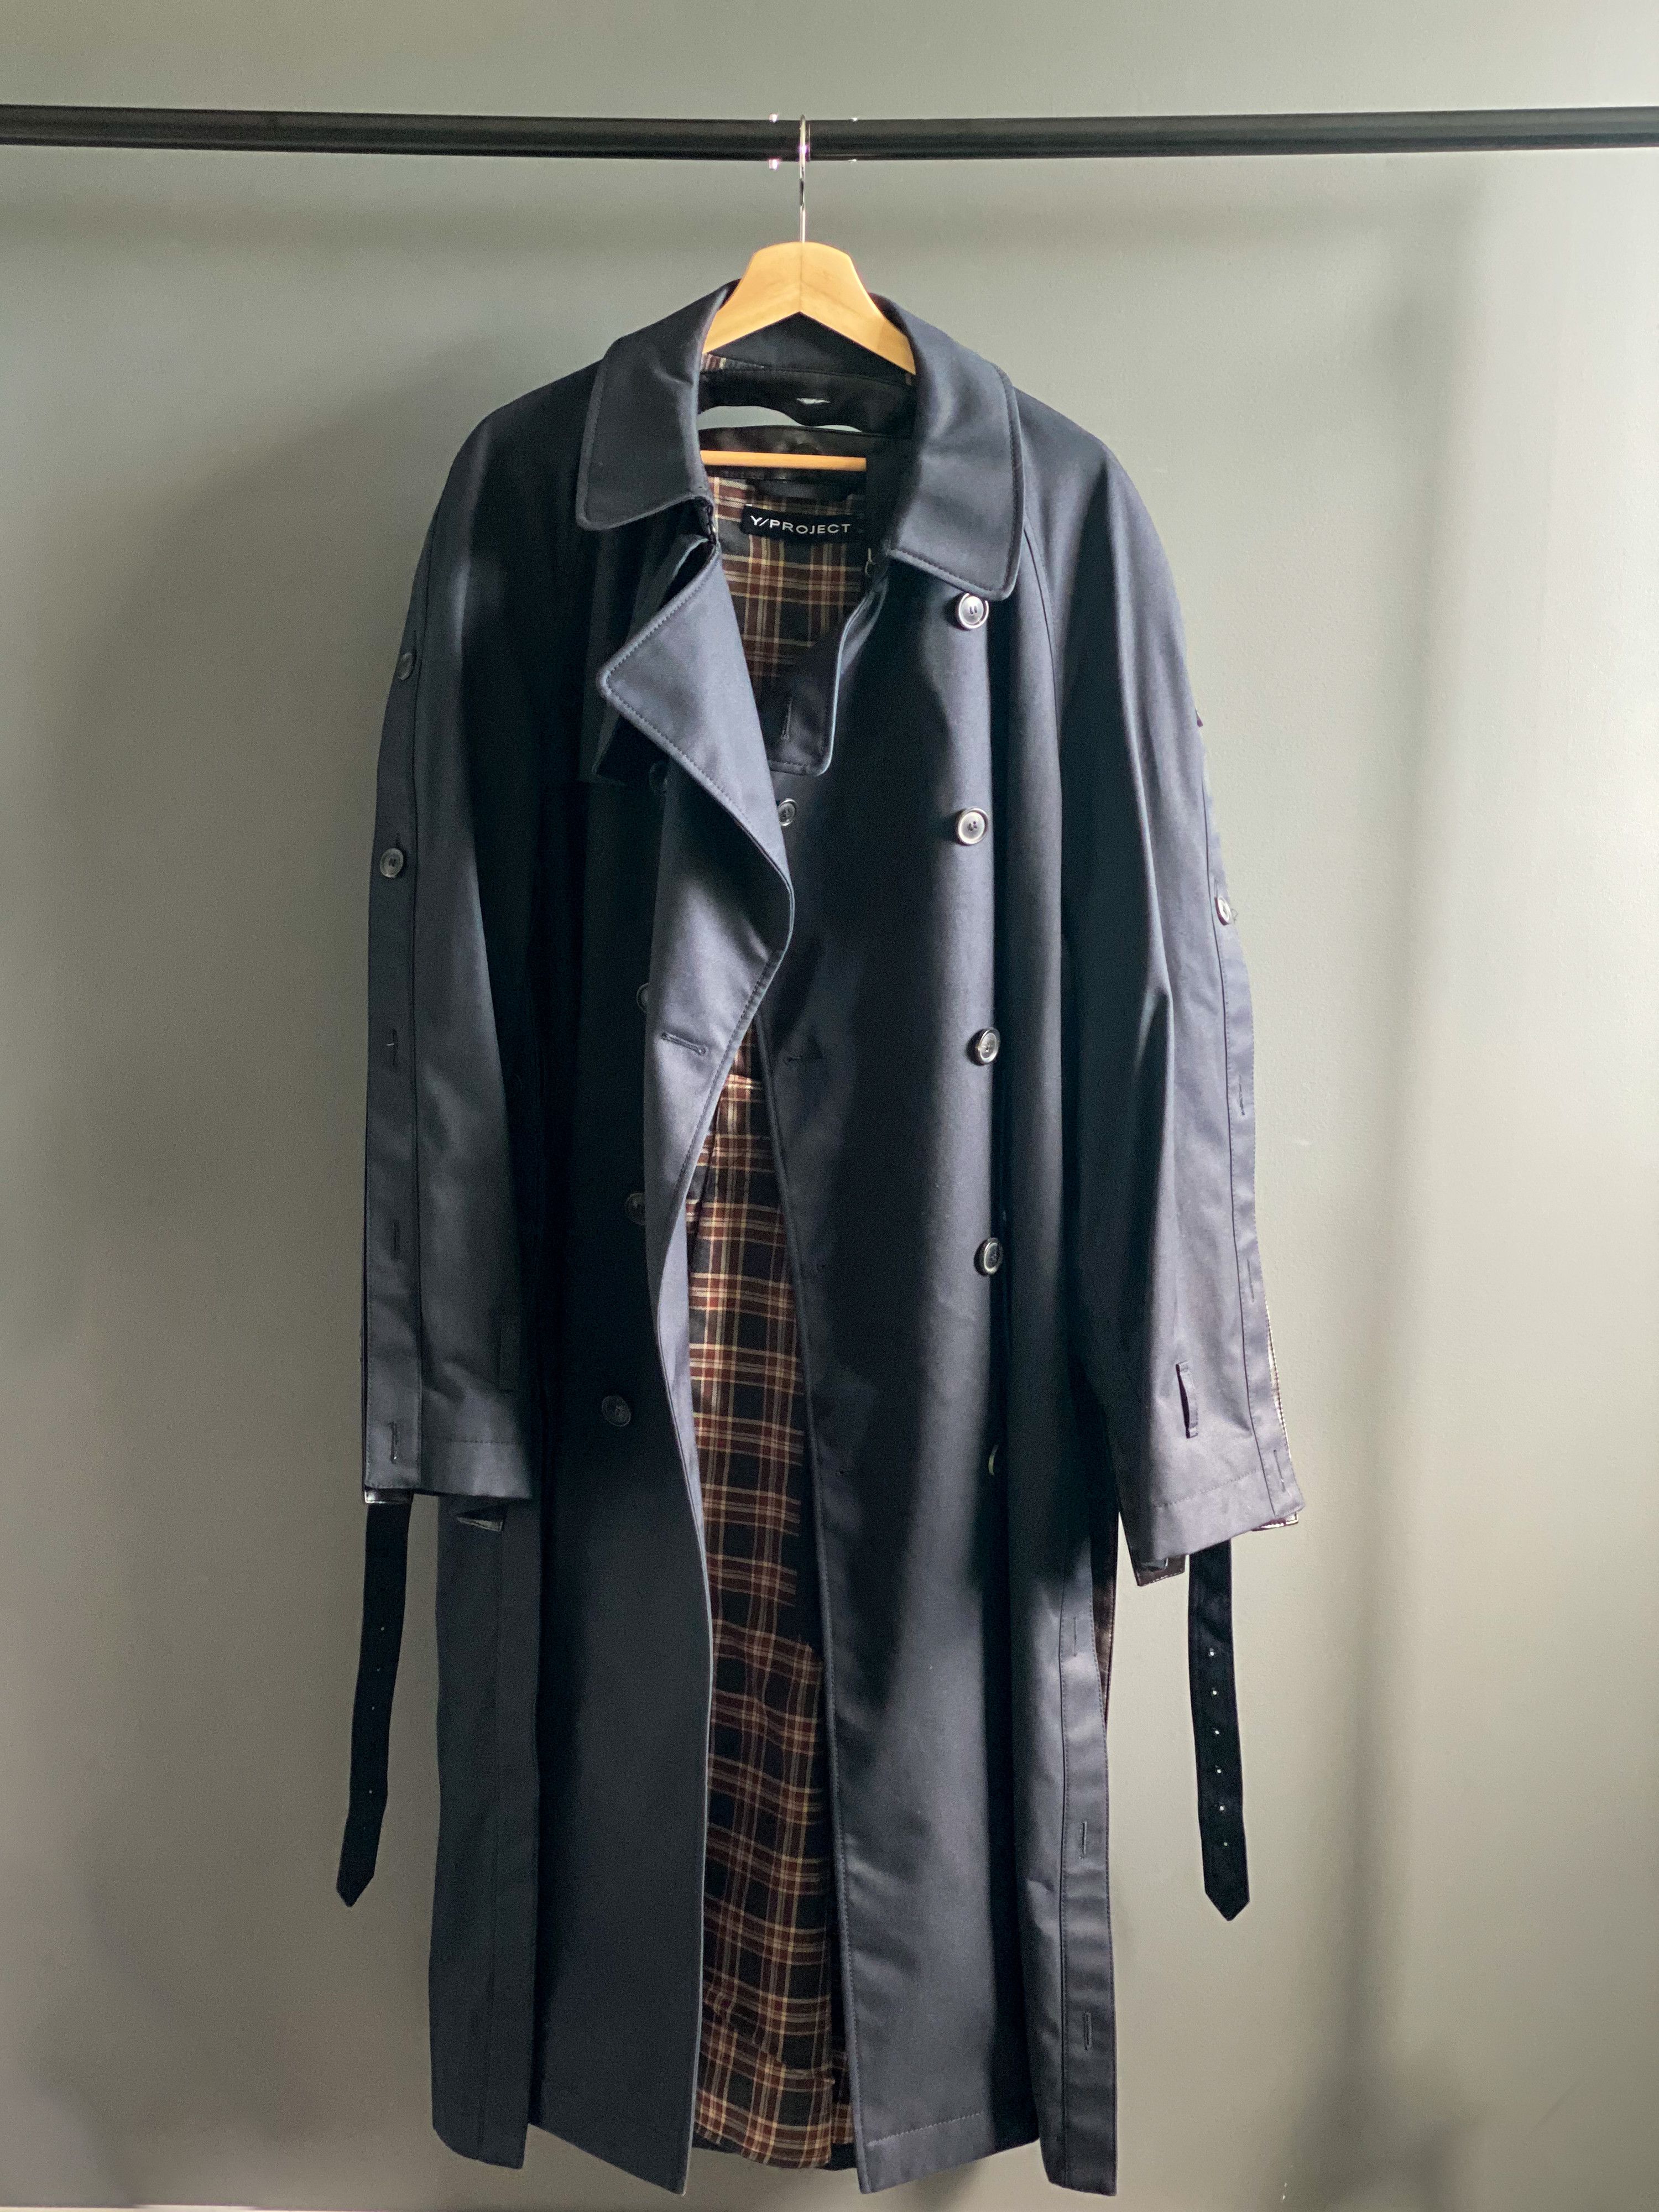 Y/Project Multi Trench Coat | Grailed